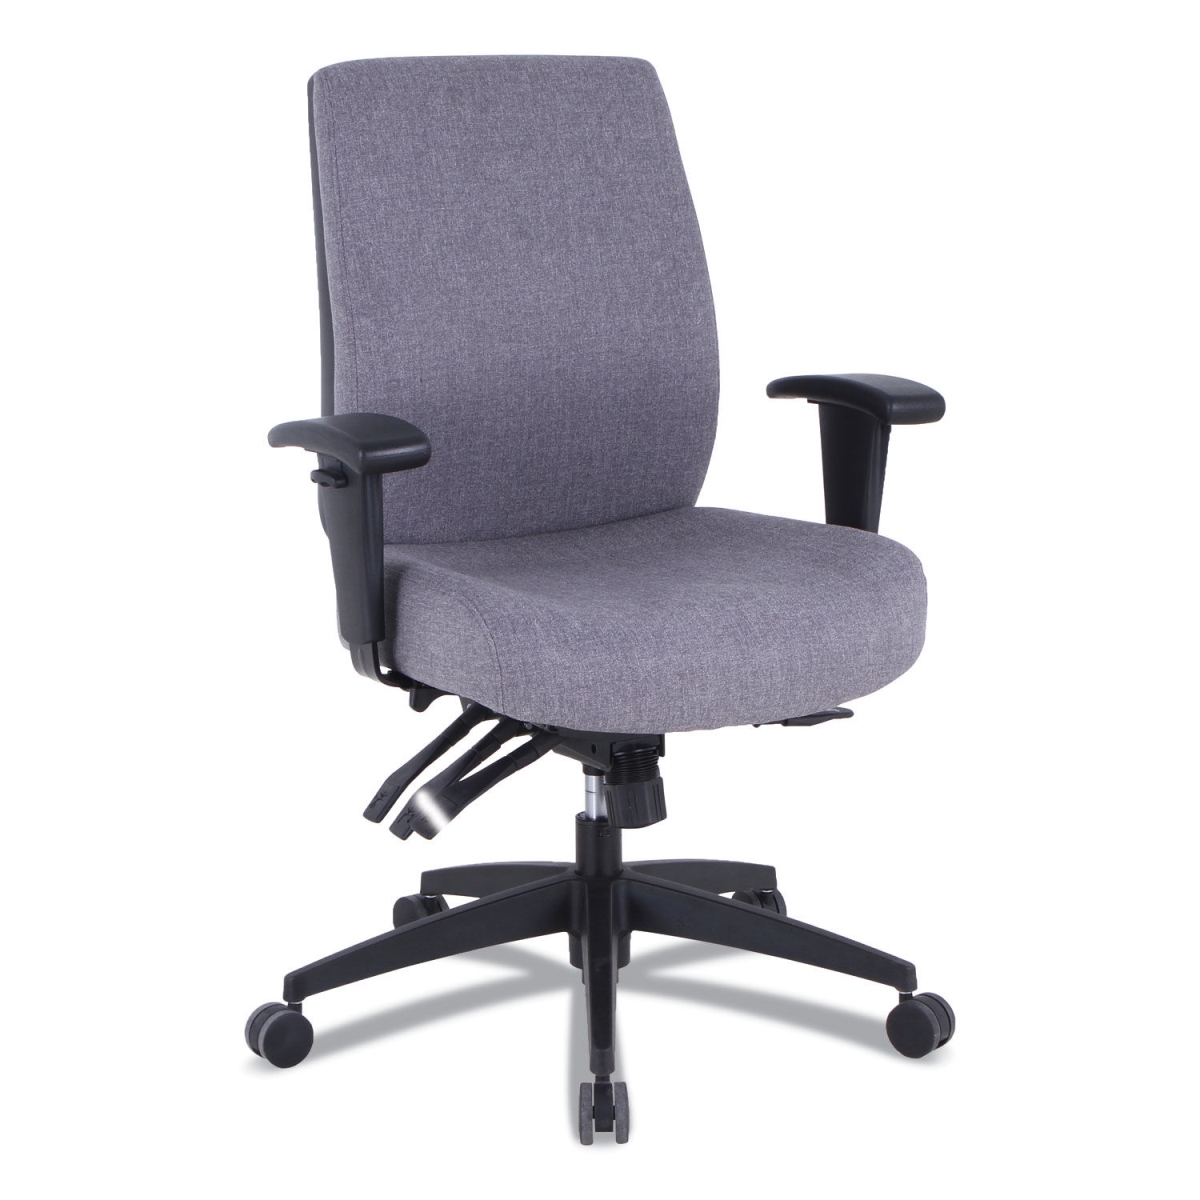 Alera Hpt4141 Series 24-7 High Performance High-back Multifunction Task Chair With Gray Seat Back, Black